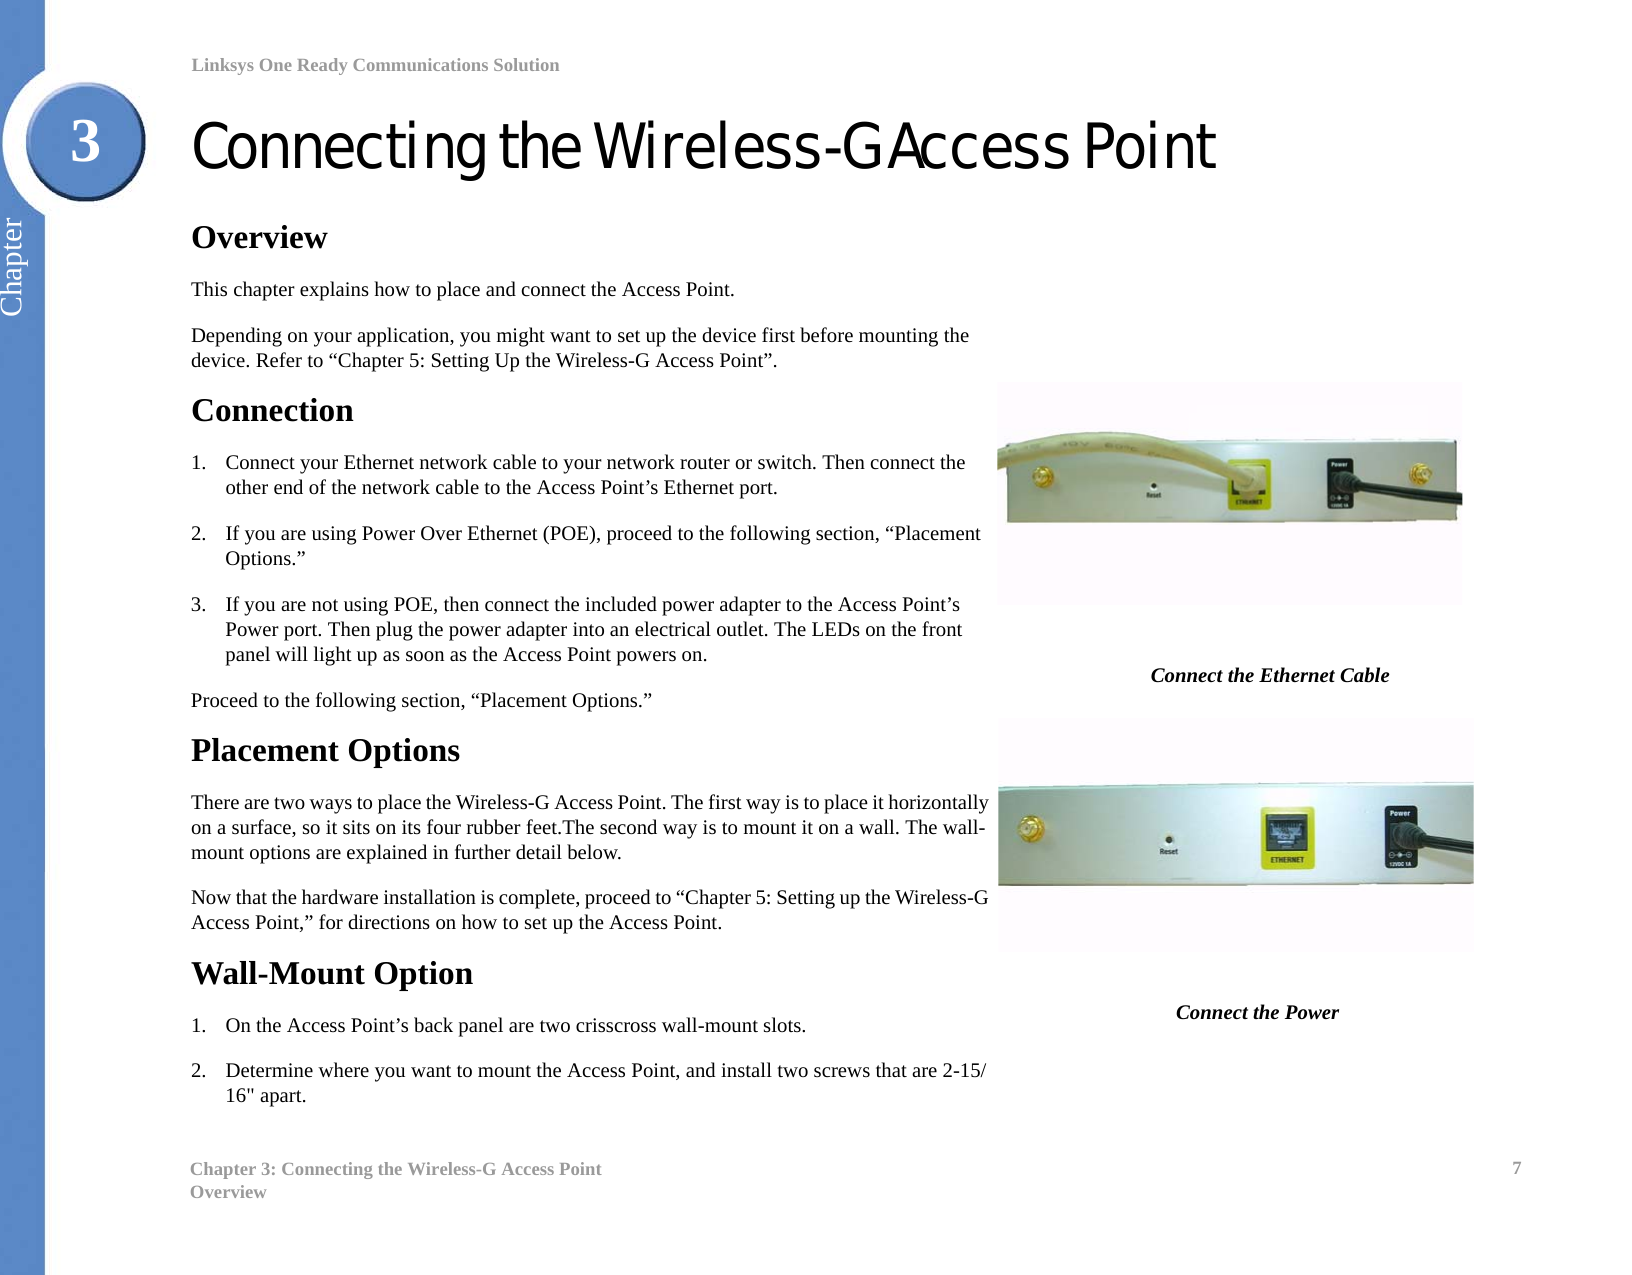 7Chapter 3: Connecting the Wireless-G Access PointOverviewLinksys One Ready Communications SolutionChapter3Connecting the Wireless-G Access PointOverviewThis chapter explains how to place and connect the Access Point. Depending on your application, you might want to set up the device first before mounting the device. Refer to “Chapter 5: Setting Up the Wireless-G Access Point”.Connection1. Connect your Ethernet network cable to your network router or switch. Then connect the other end of the network cable to the Access Point’s Ethernet port.2. If you are using Power Over Ethernet (POE), proceed to the following section, “Placement Options.”3. If you are not using POE, then connect the included power adapter to the Access Point’s Power port. Then plug the power adapter into an electrical outlet. The LEDs on the front panel will light up as soon as the Access Point powers on.Proceed to the following section, “Placement Options.”Placement OptionsThere are two ways to place the Wireless-G Access Point. The first way is to place it horizontally on a surface, so it sits on its four rubber feet.The second way is to mount it on a wall. The wall-mount options are explained in further detail below.Now that the hardware installation is complete, proceed to “Chapter 5: Setting up the Wireless-G Access Point,” for directions on how to set up the Access Point.Wall-Mount Option1. On the Access Point’s back panel are two crisscross wall-mount slots. 2. Determine where you want to mount the Access Point, and install two screws that are 2-15/16&quot; apart.Connect the Ethernet CableConnect the Power